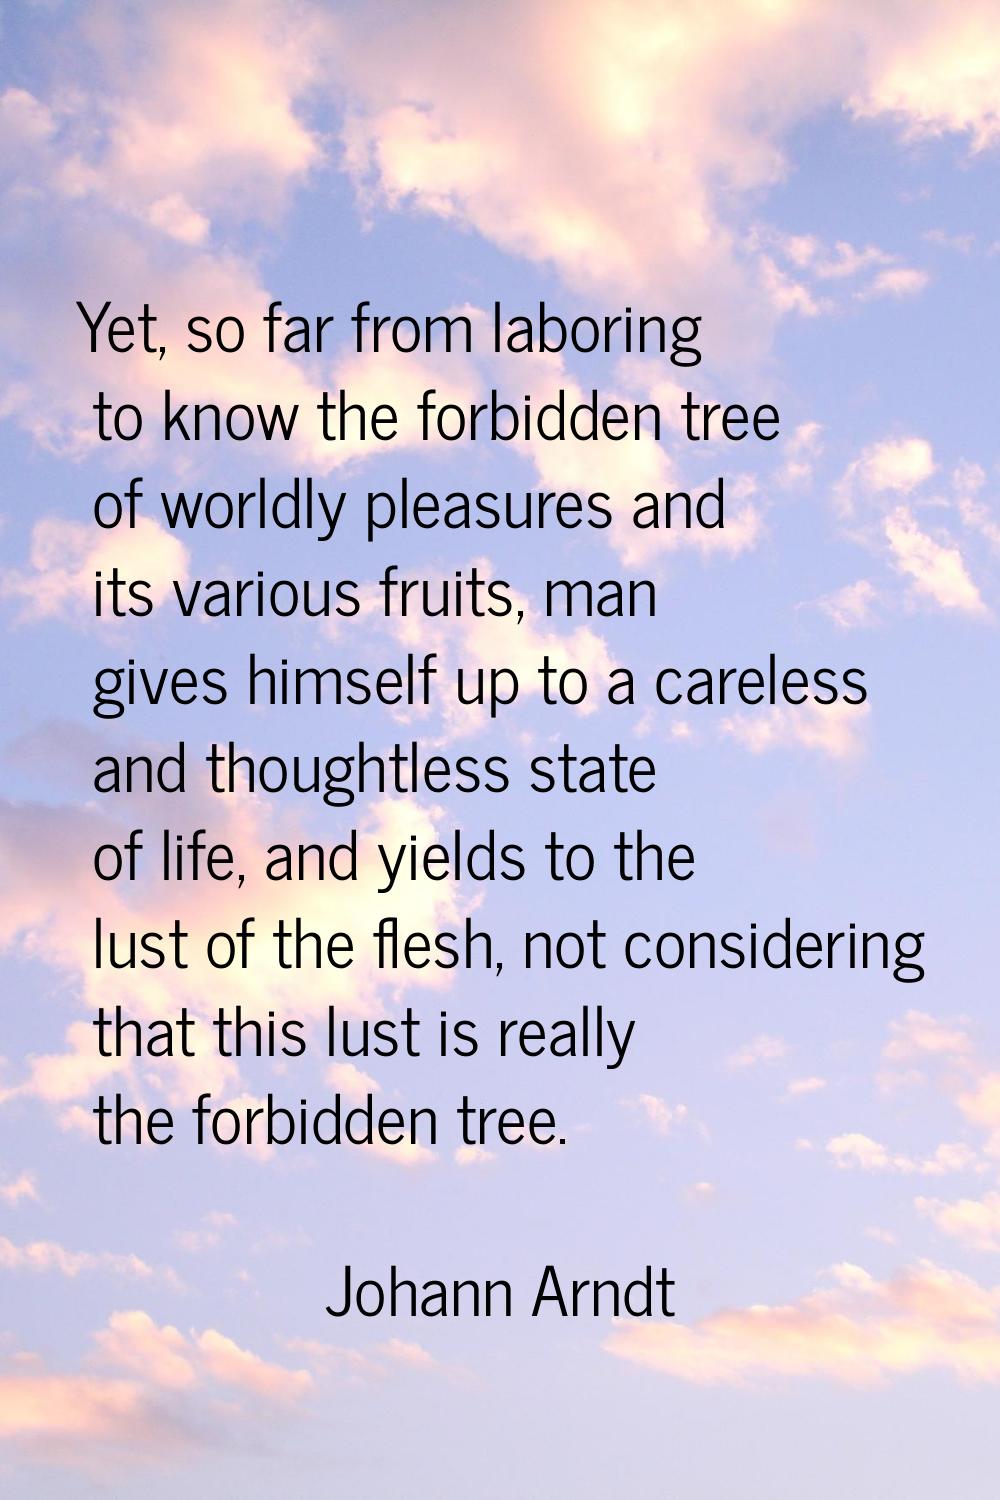 Yet, so far from laboring to know the forbidden tree of worldly pleasures and its various fruits, m